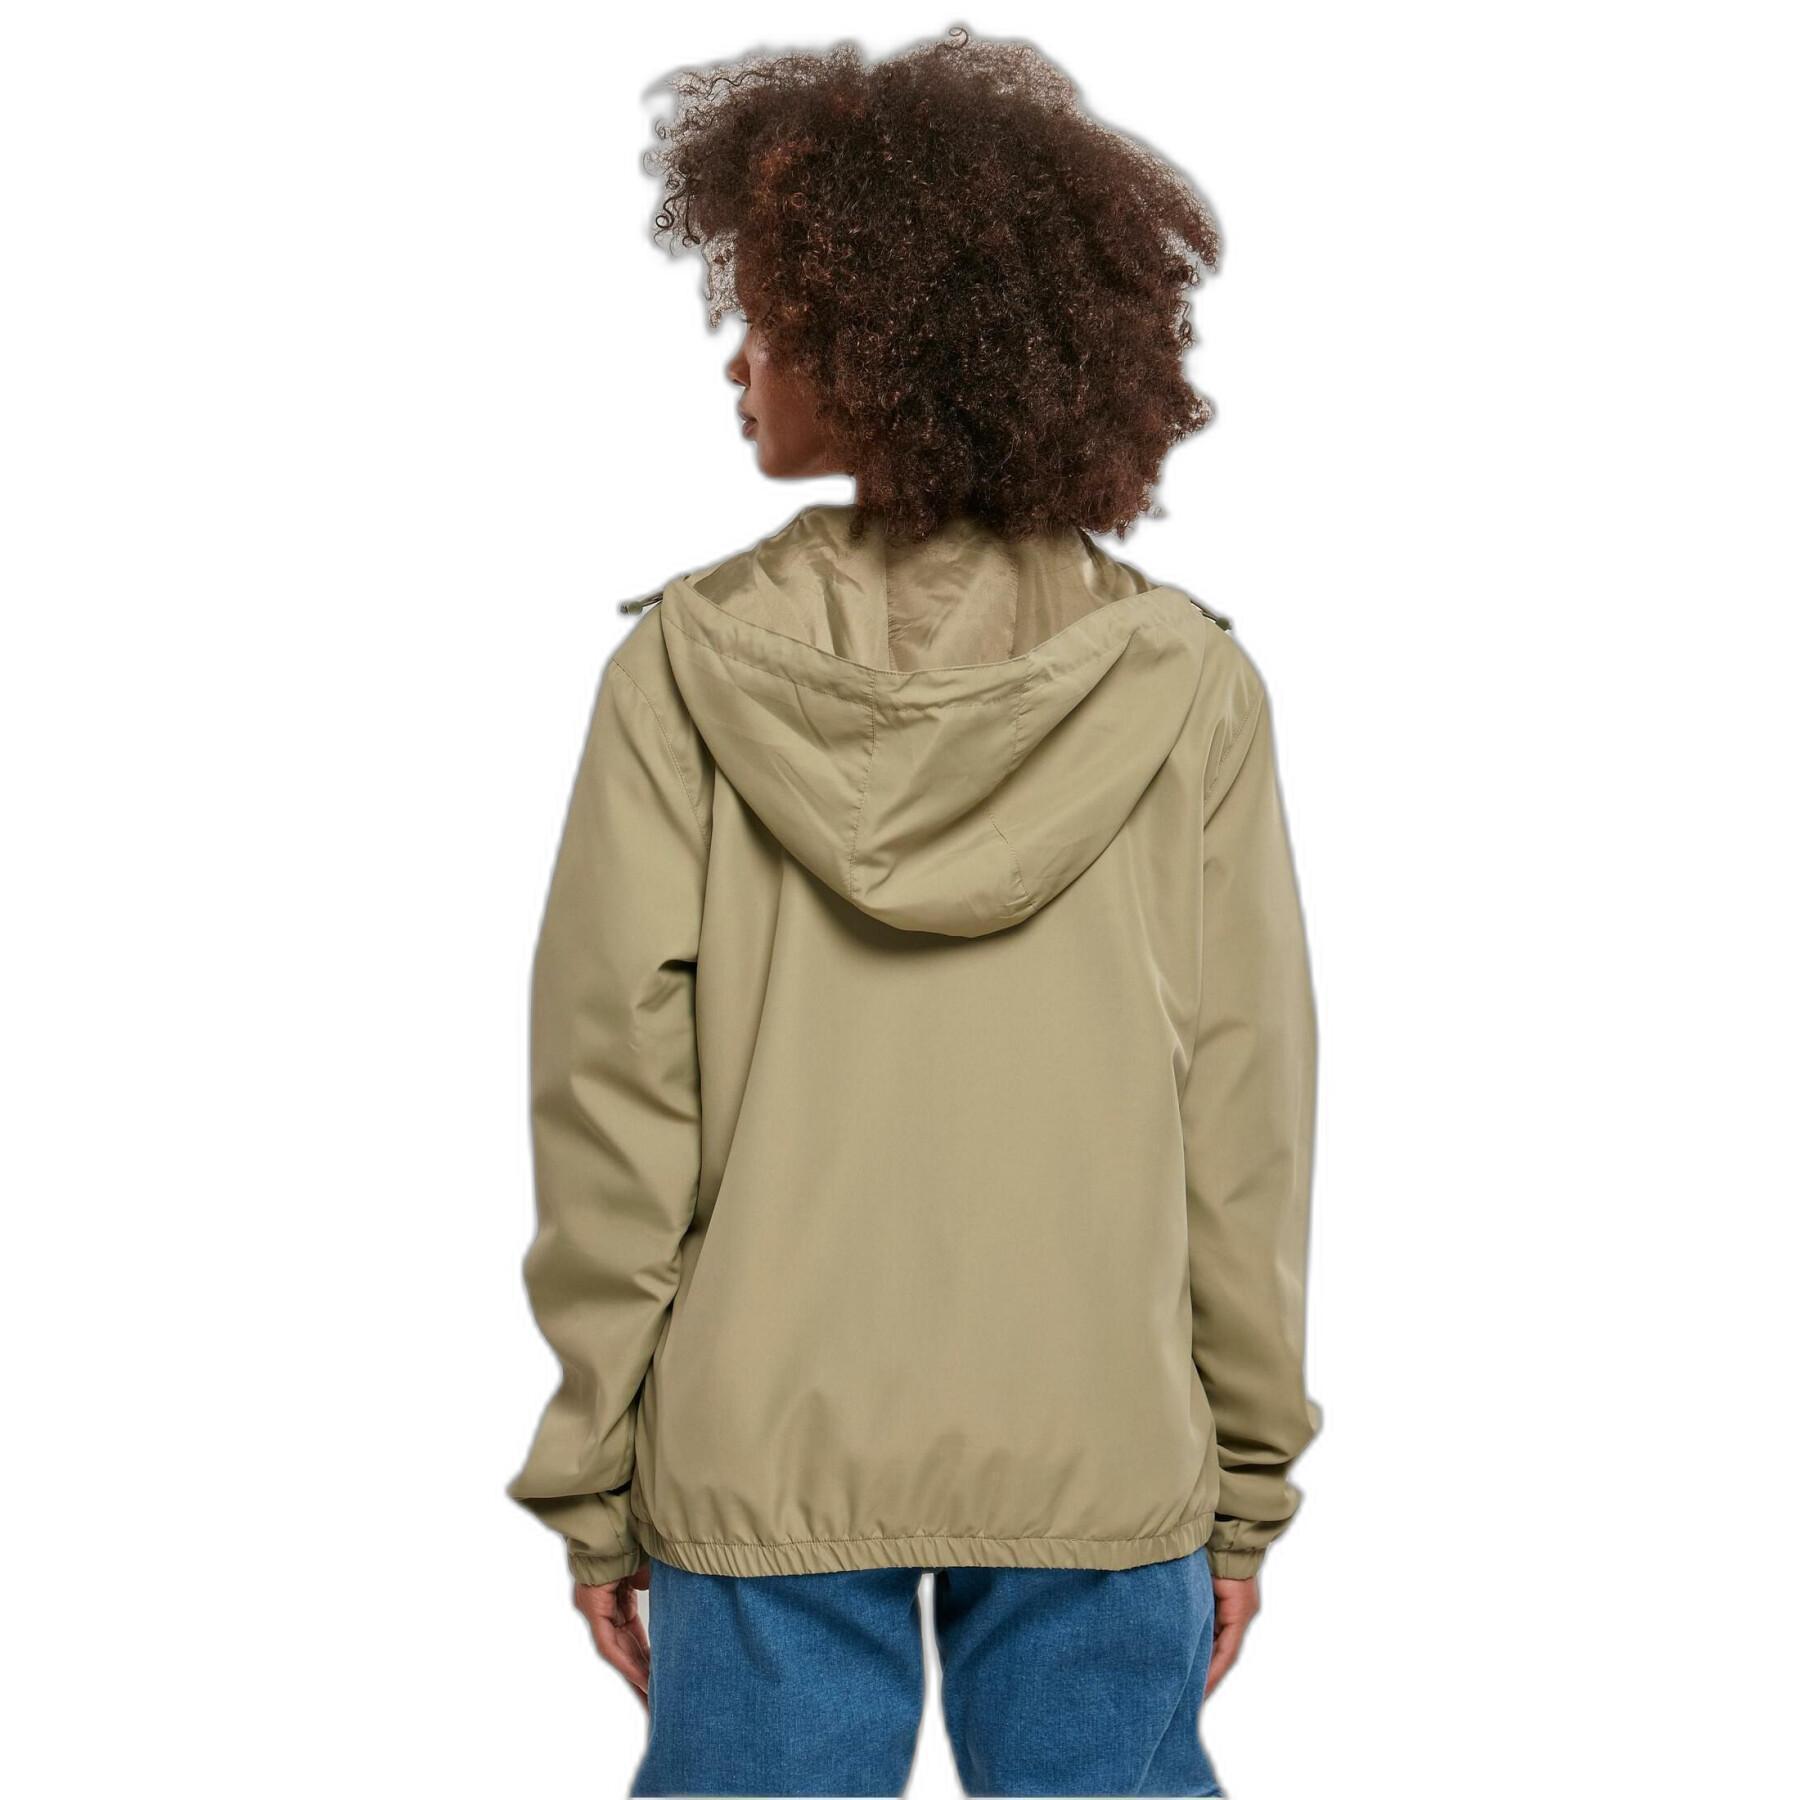 Chaqueta impermeable mujer Urban Classics Recycled Basic GT